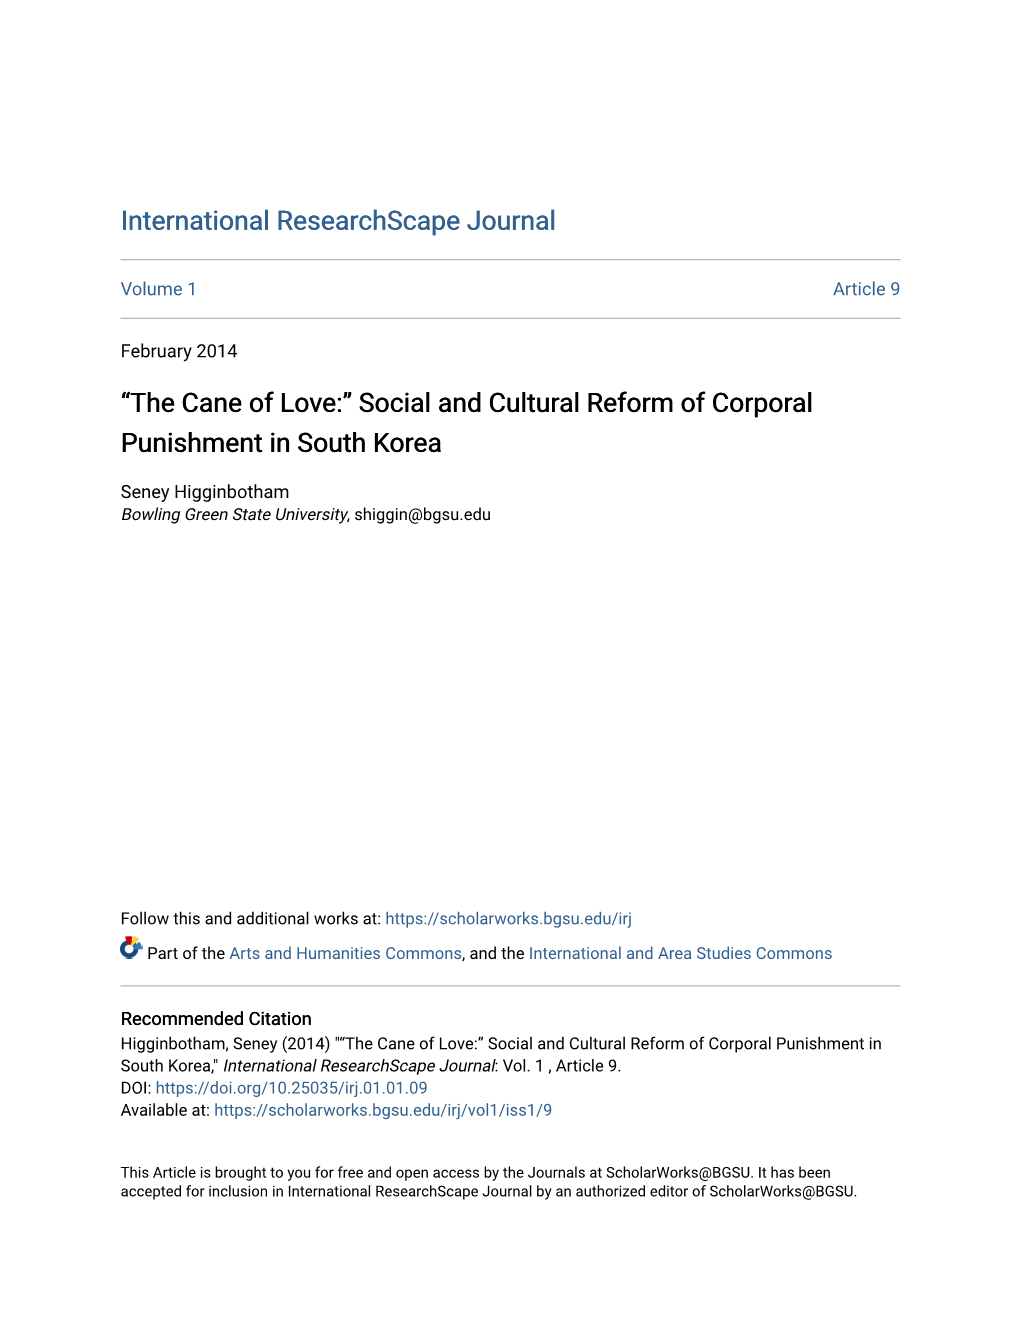 Social and Cultural Reform of Corporal Punishment in South Korea